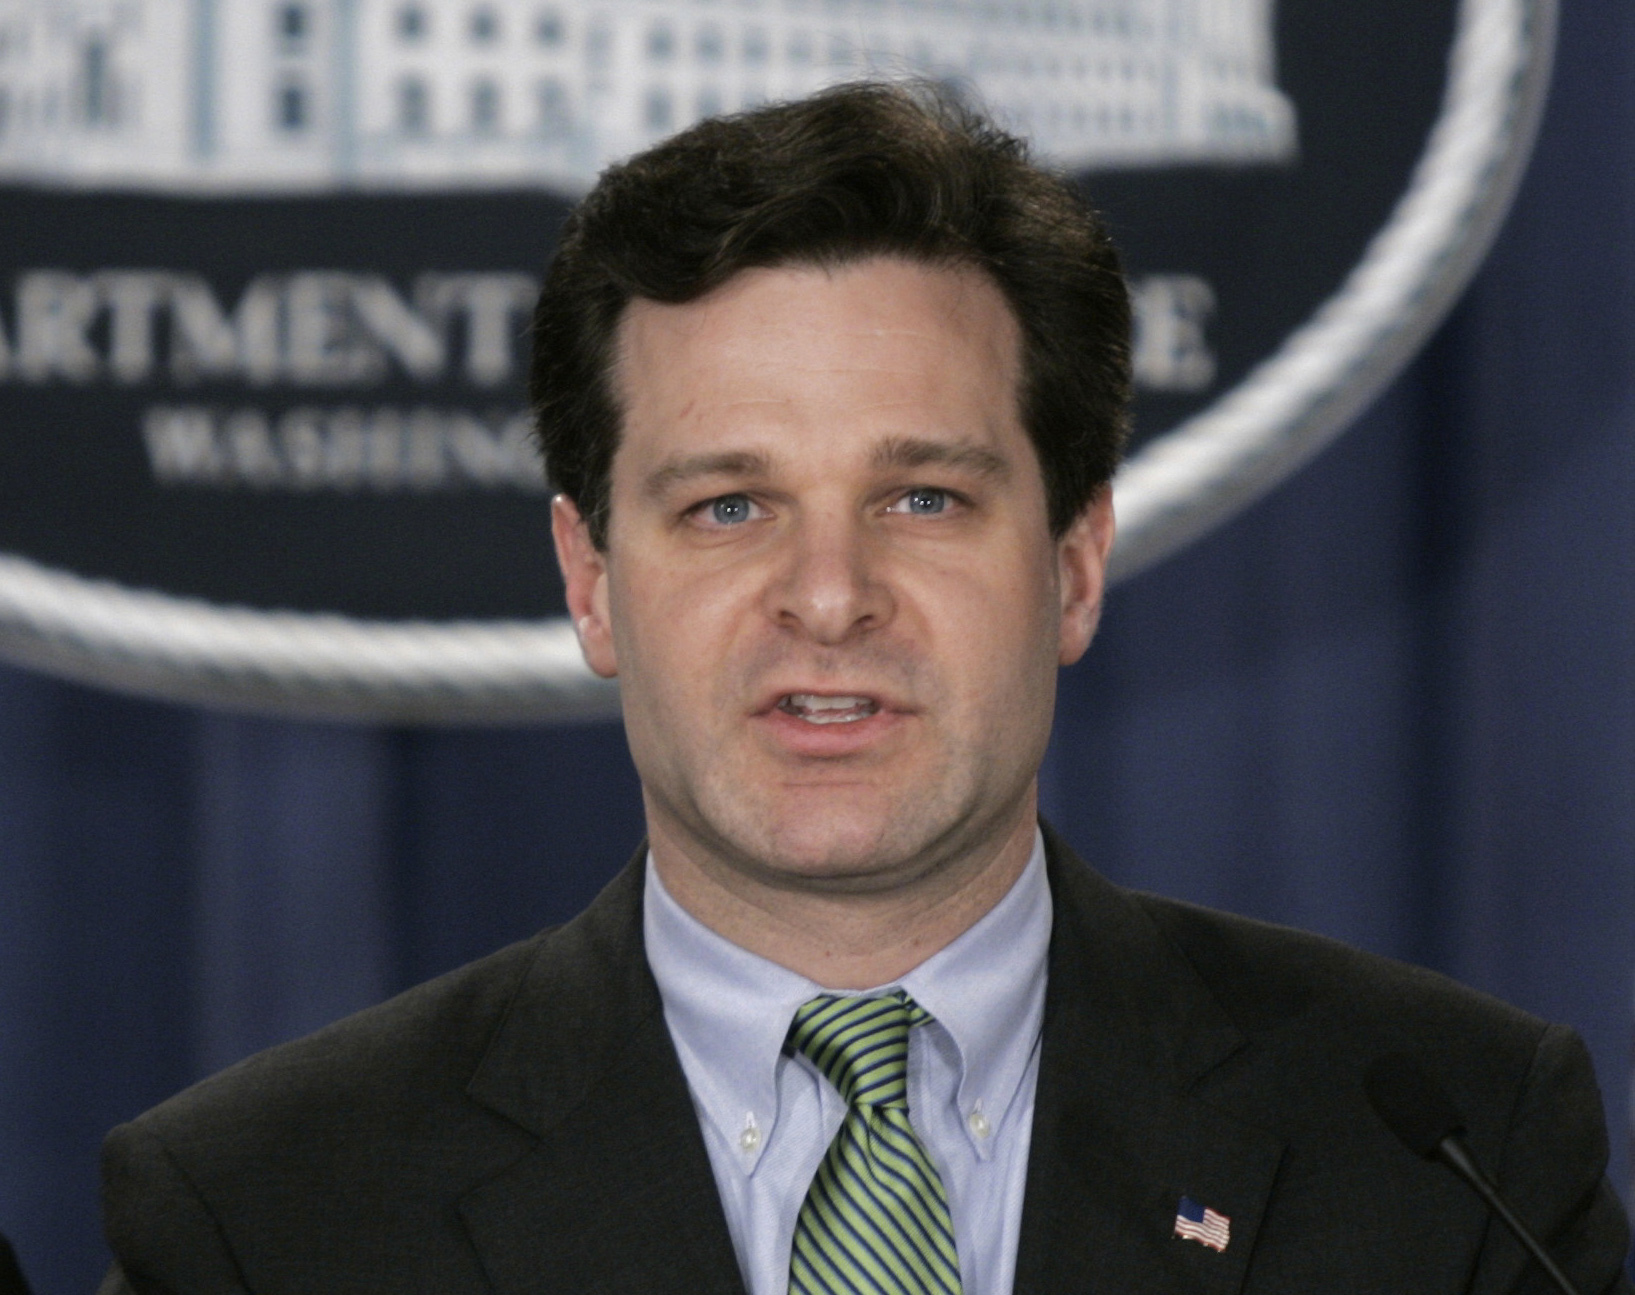 In this Jan. 12, 2005 file photo, Assistant Attorney General, Christopher Wray speaks at a press conference at the Justice Dept. in Washington. US President Donald Trump has picked a longtime lawyer and former Justice Department official to be the next FBI director. Trump said on Twitter Wednesday that he will be nominating Christopher Wray, calling him "a man of impeccable credentials." [Photo: AP/Lawrence Jackson]